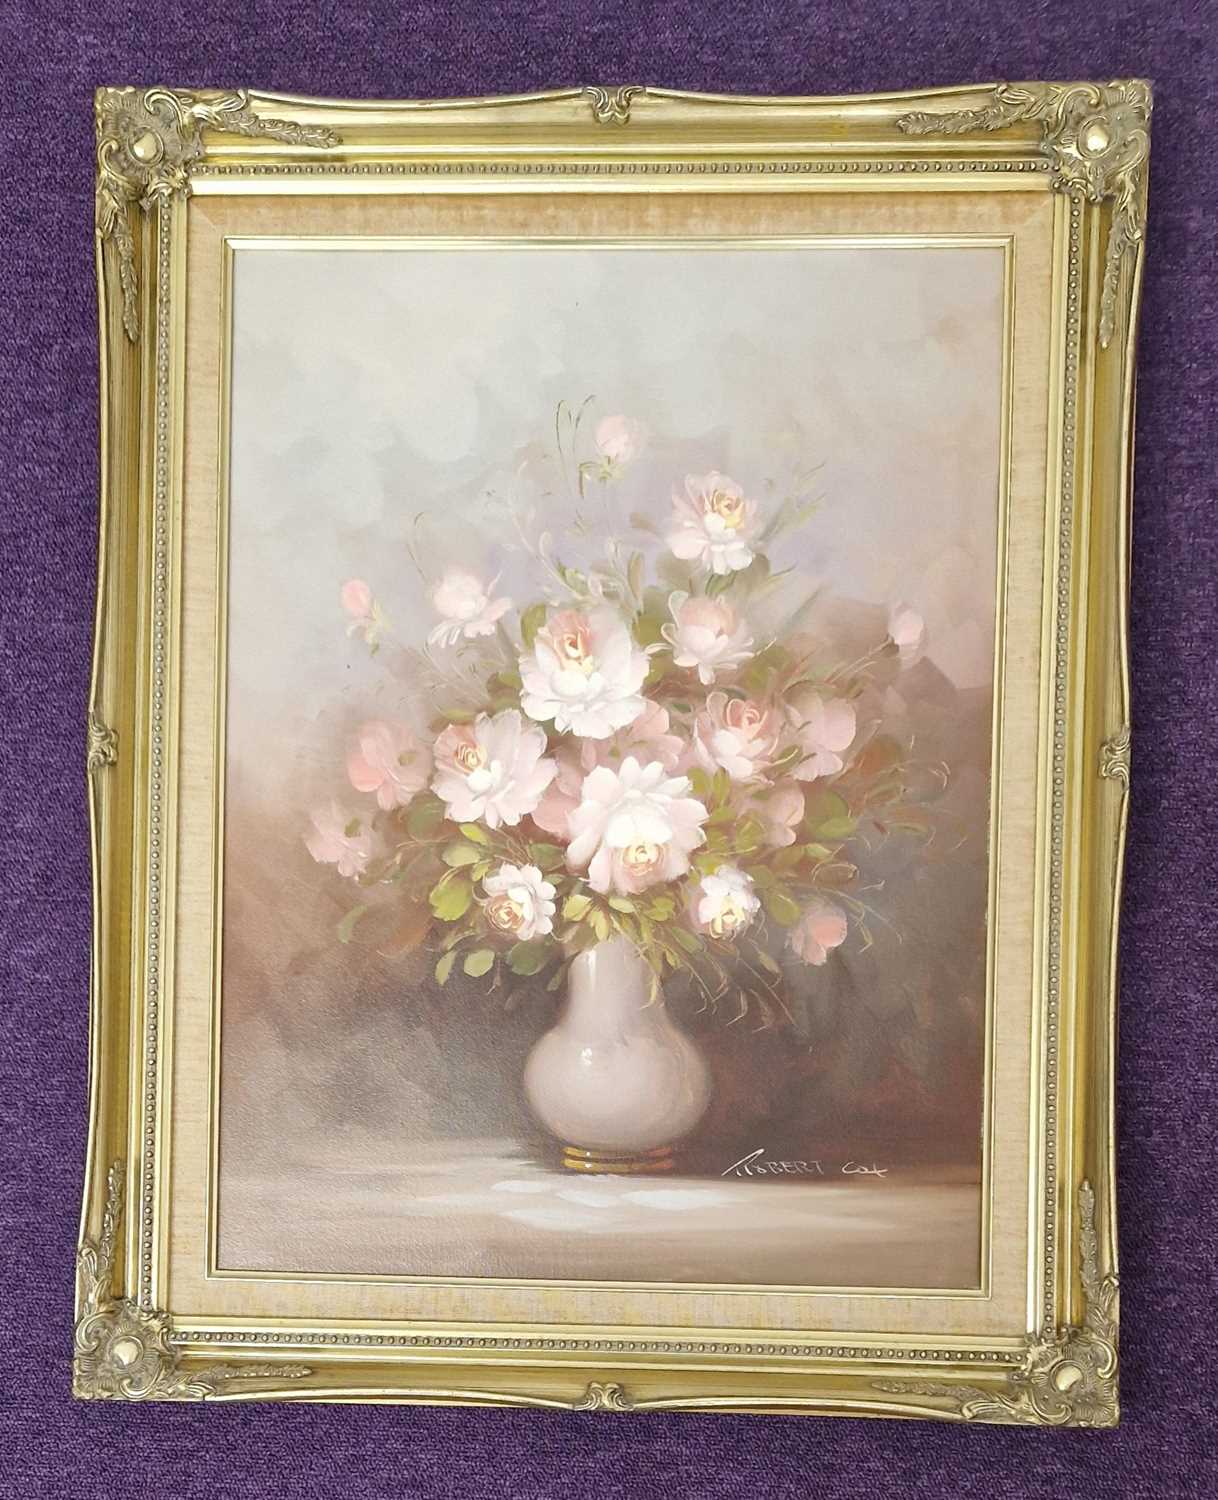 ROBERT COX oil on canvas - entitled 'Flowers in Vase', 74 x 59cms Comments: vintage gold frame - Image 3 of 4